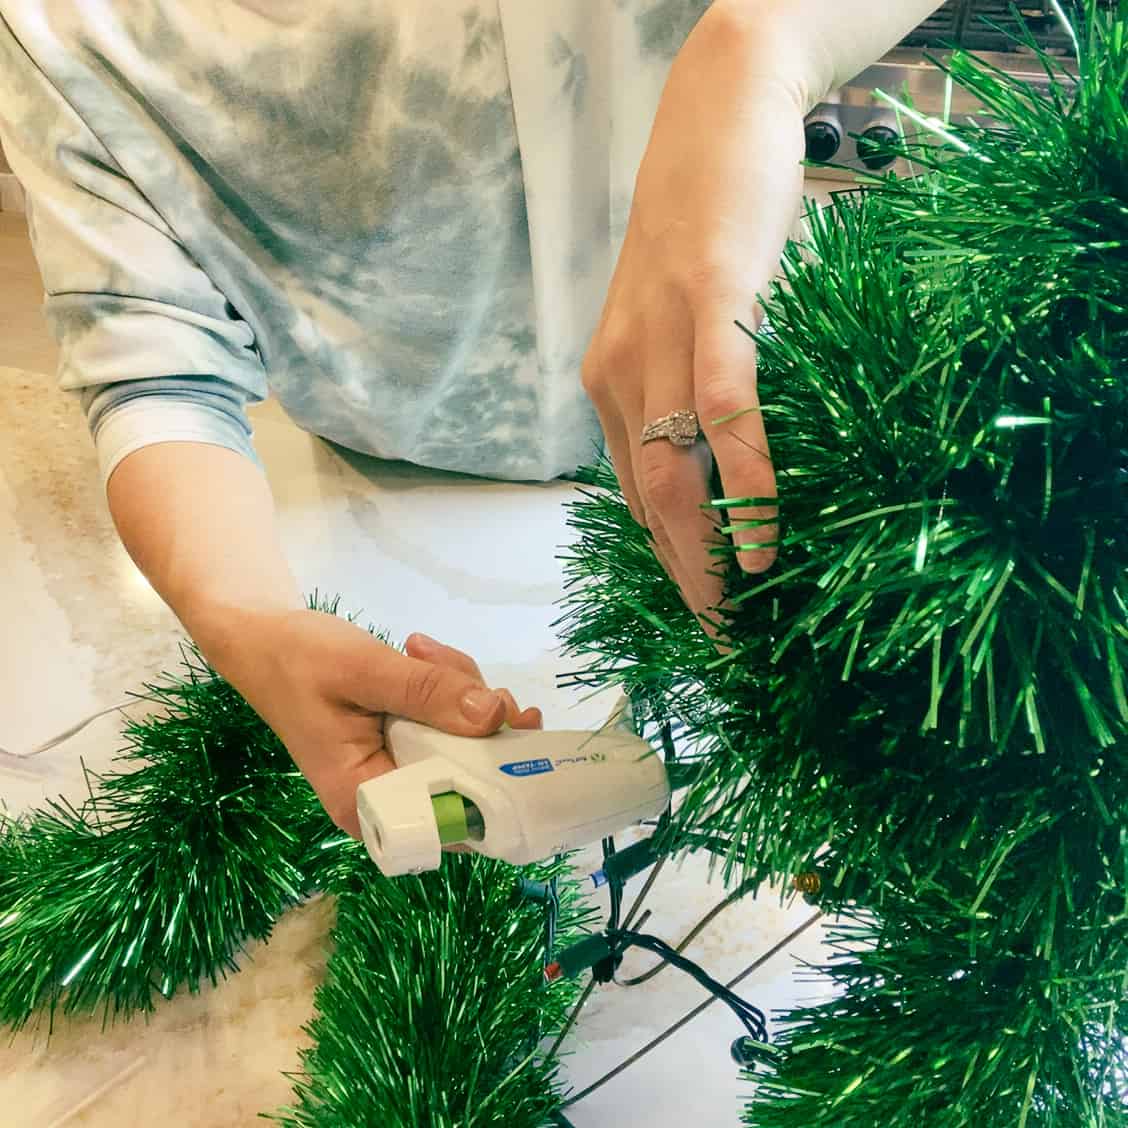 Finishing up gluing the green garland to the Christmas tree.